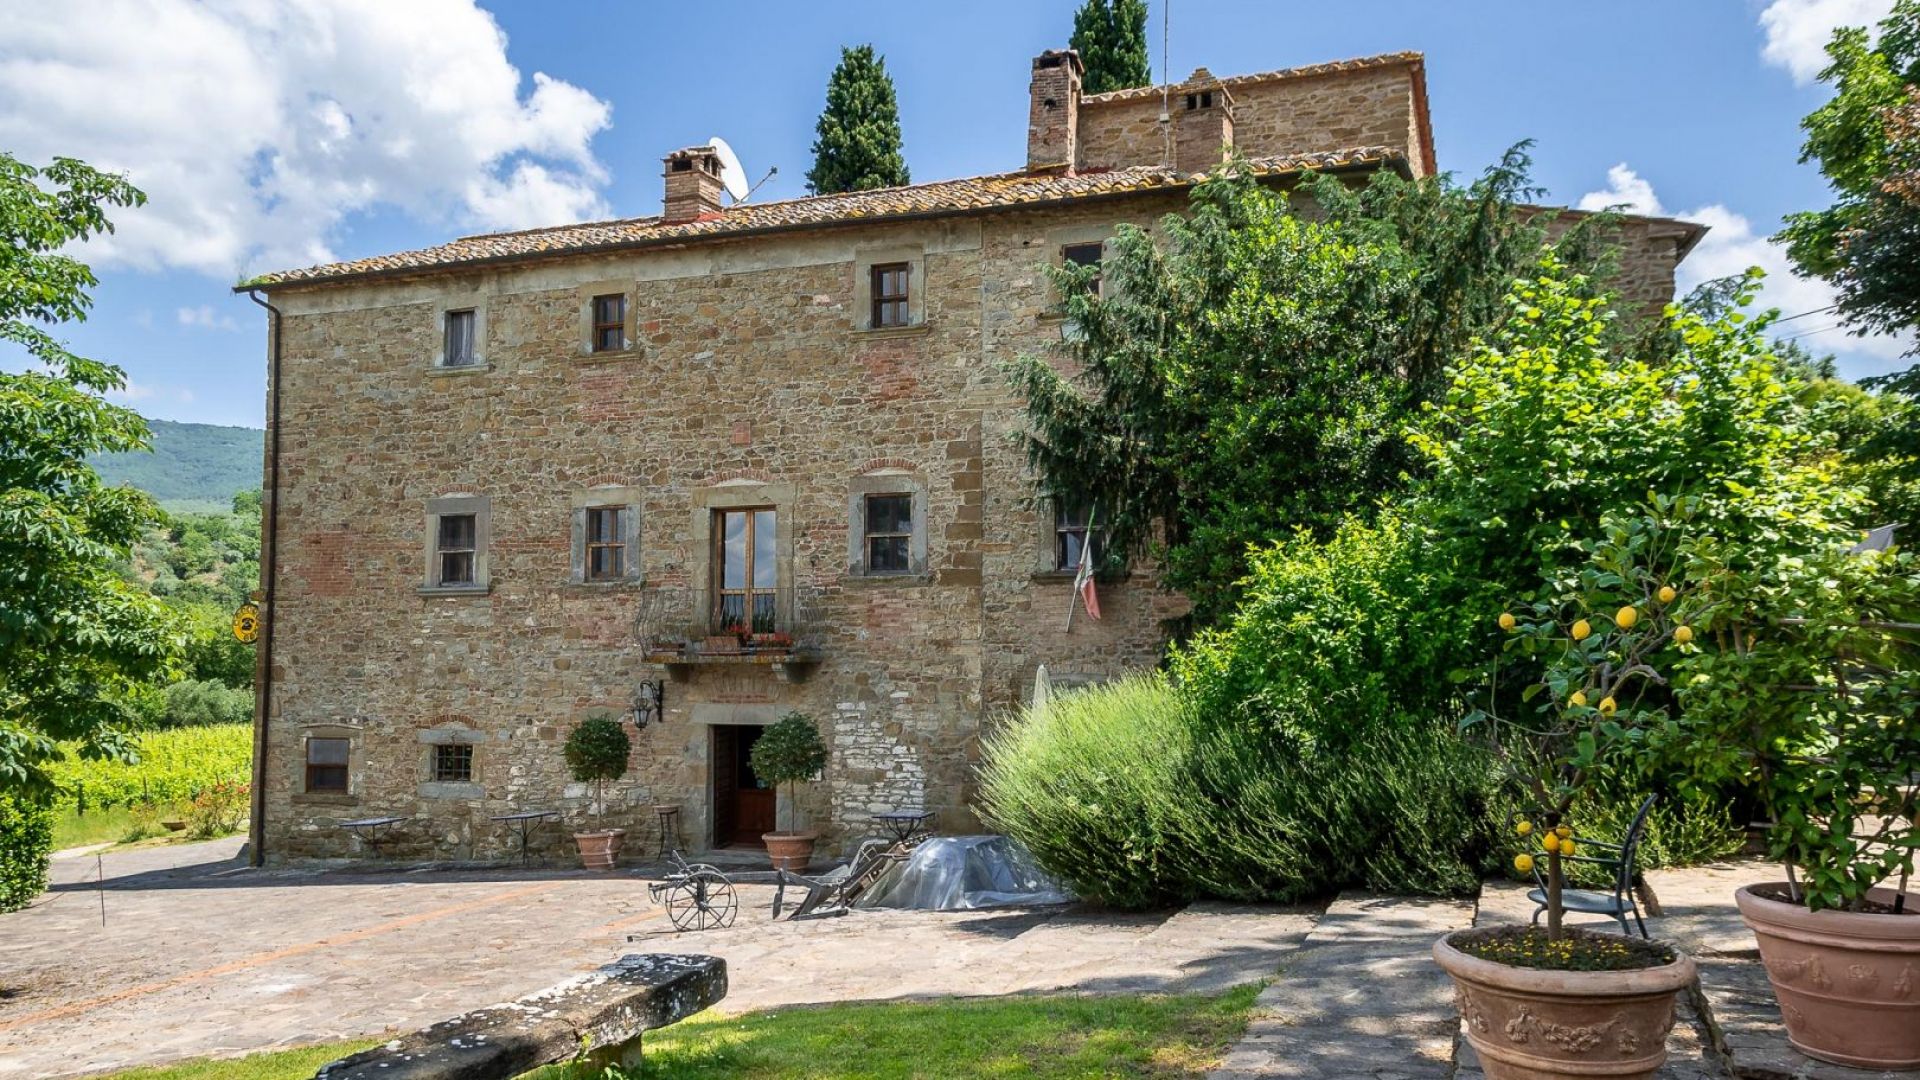 For sale cottage in  Cortona Toscana